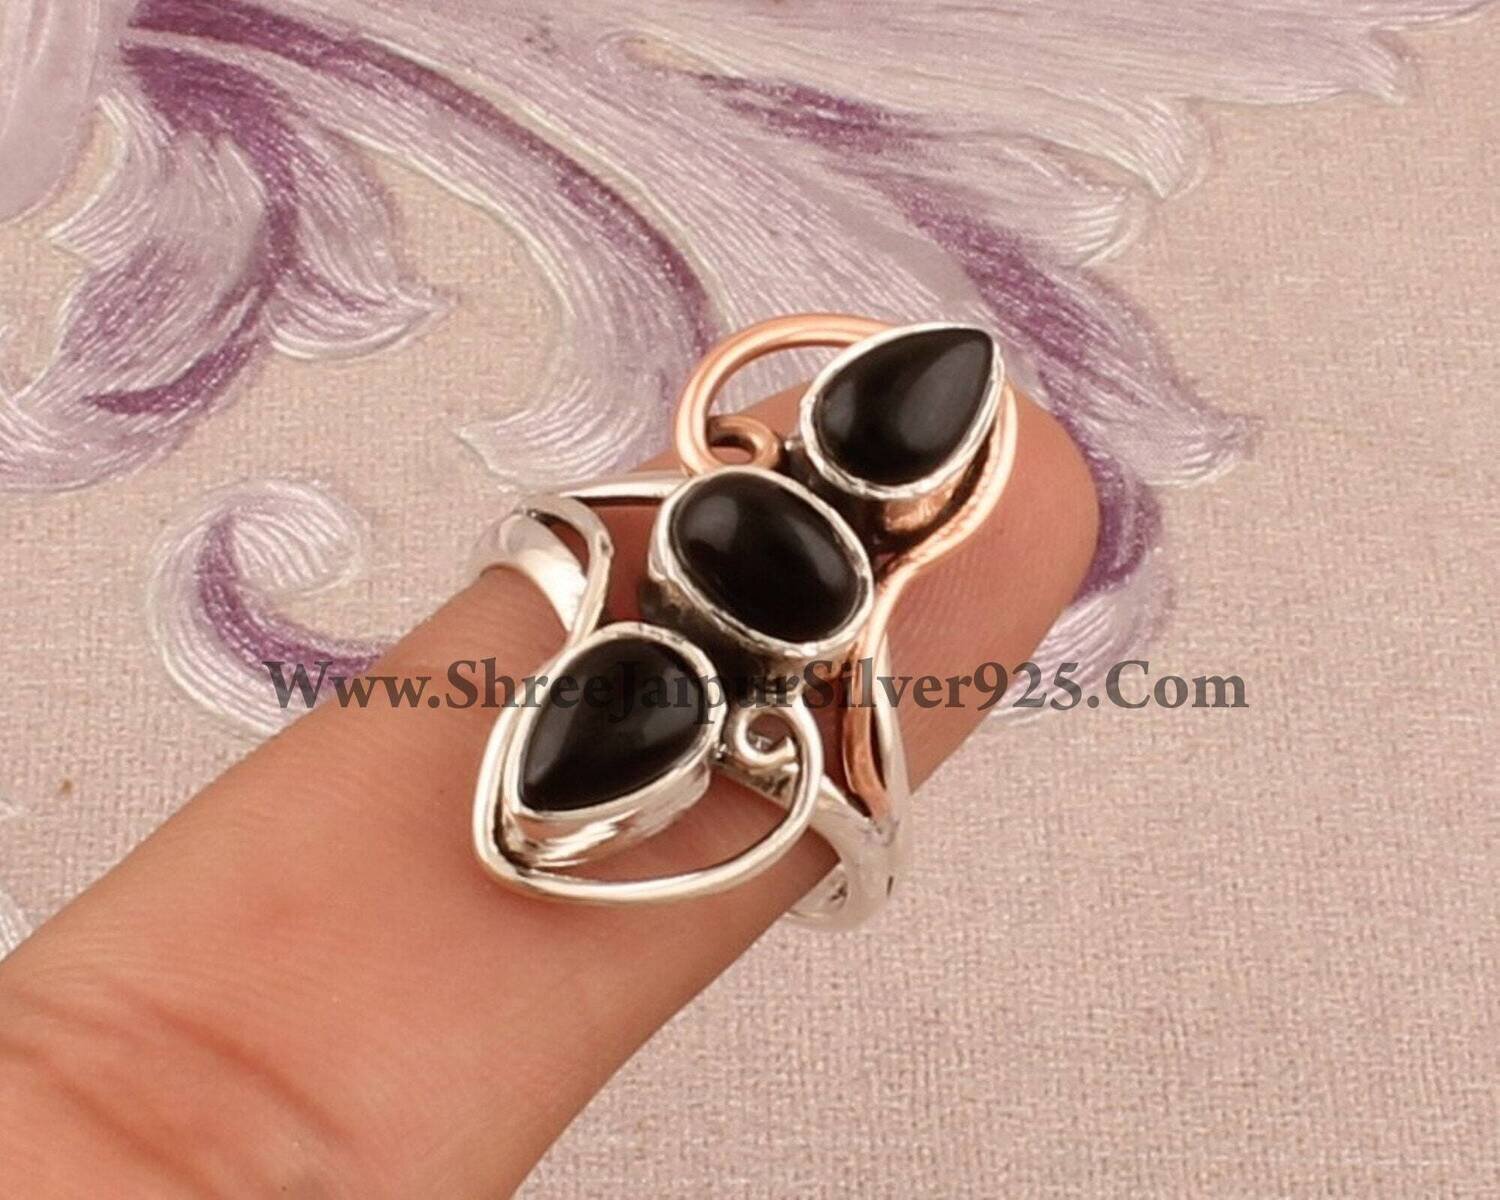 Natural Black Onyx Ring 925 Sterling Silver Rings For Women Oval Pear Handmade Gemstone Jewelry Engagement Vintage Dainty Anniversary Gifts.